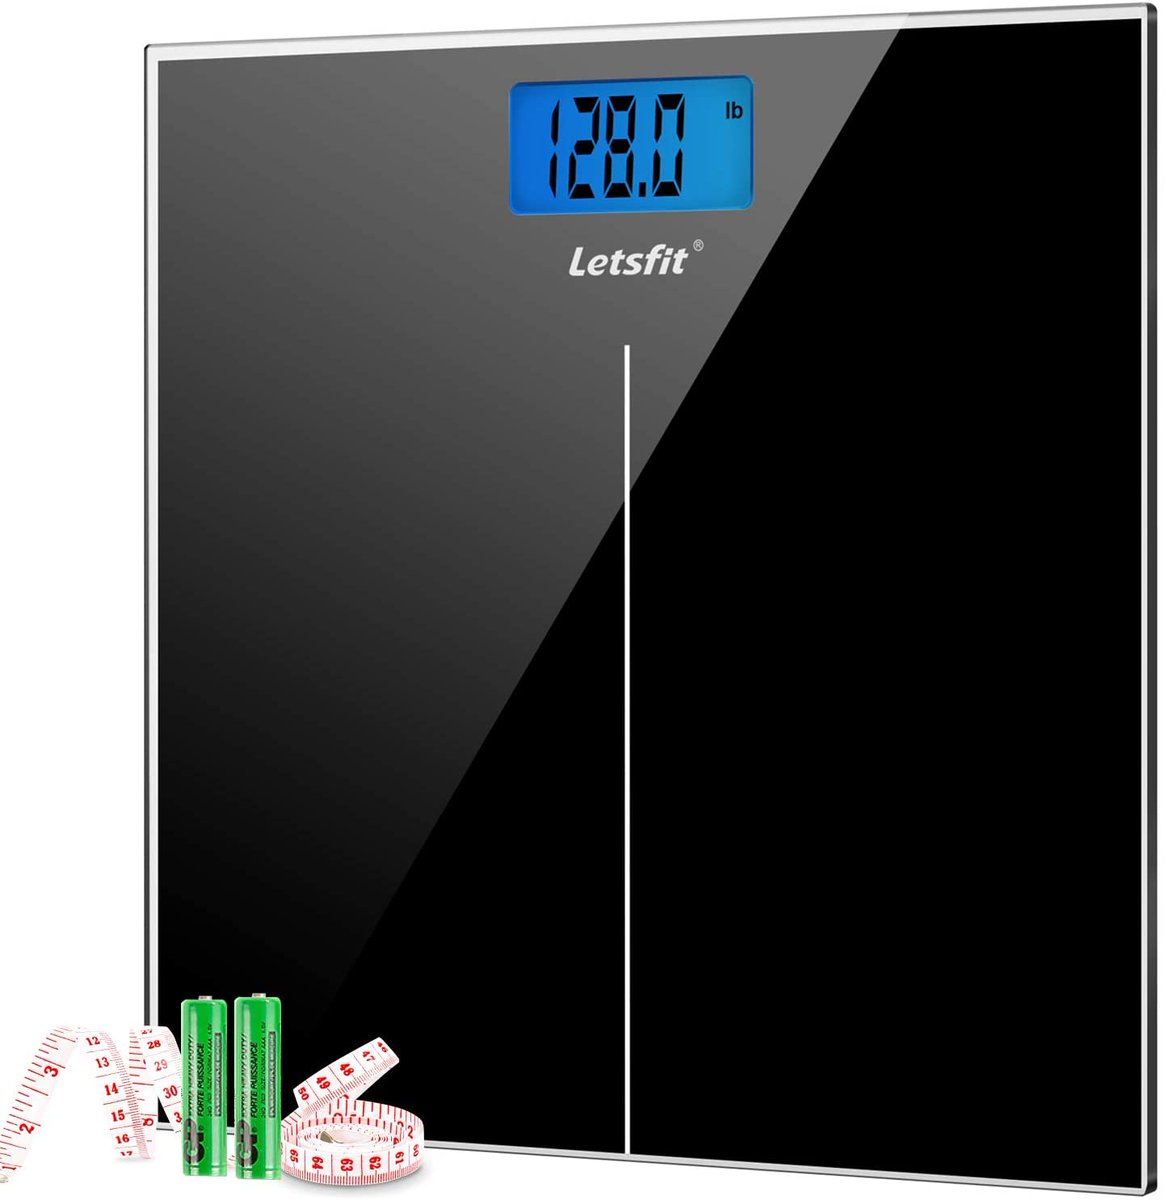 Digital Bodyscale on sale for ONLY $16.14!

amzn.to/3h5GgH8